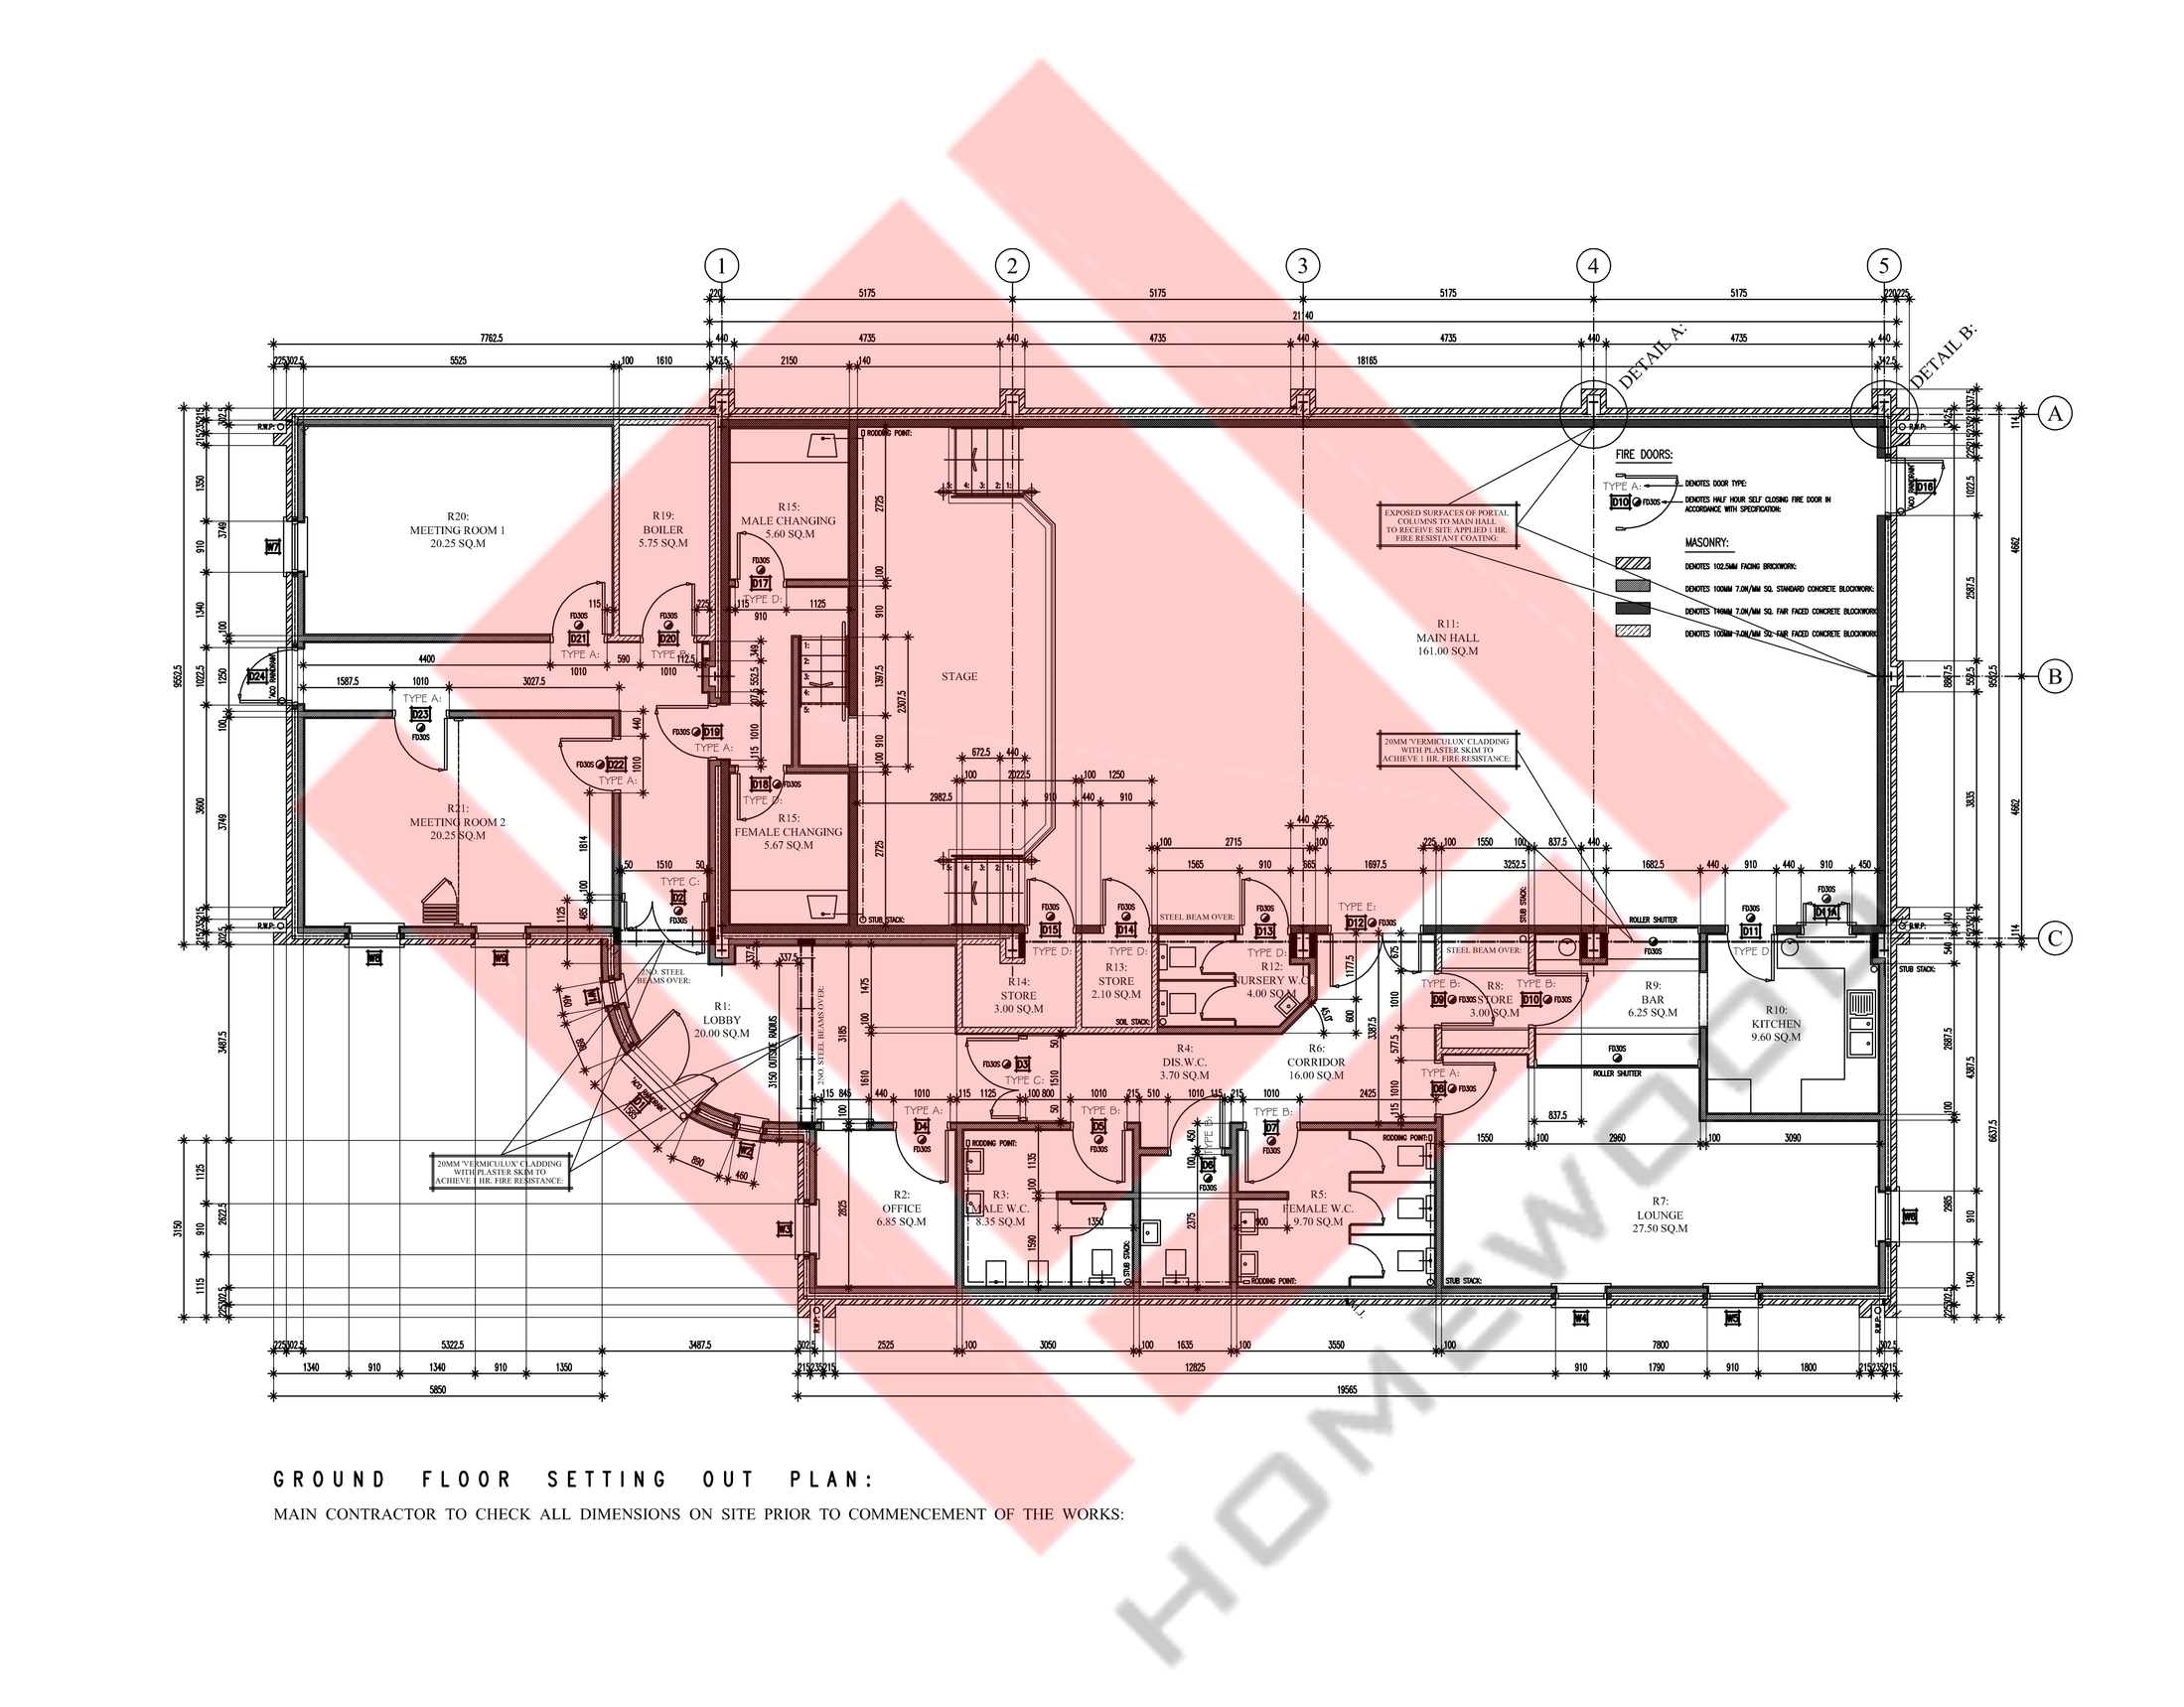 03 Floor Plan.Image.Marked_1.png